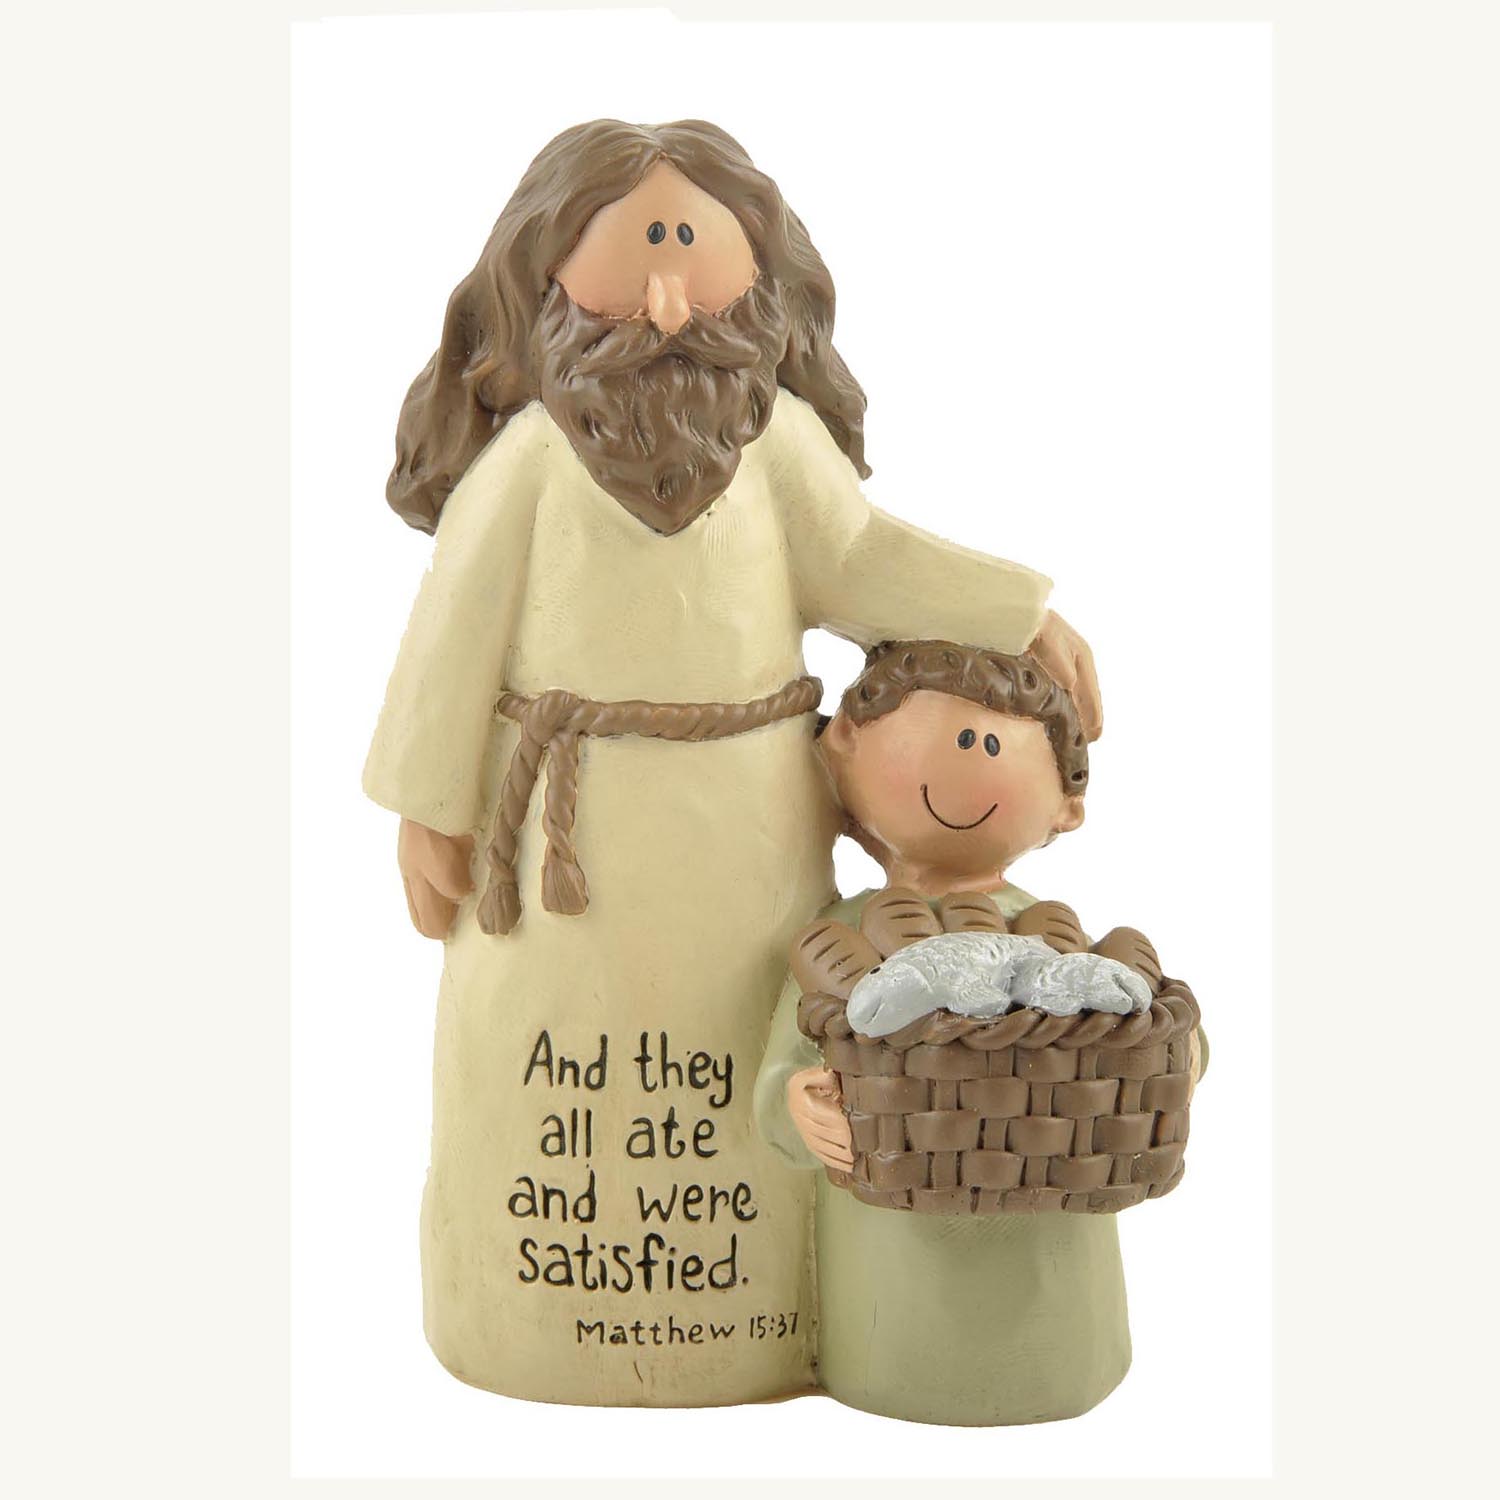 Spiritual Comfort: Bible Story Resin Figurine 'THEY ALL ATE' JESUS & BOY W/BASKET Symbolizing Fulfillment and Blessings1211-87512